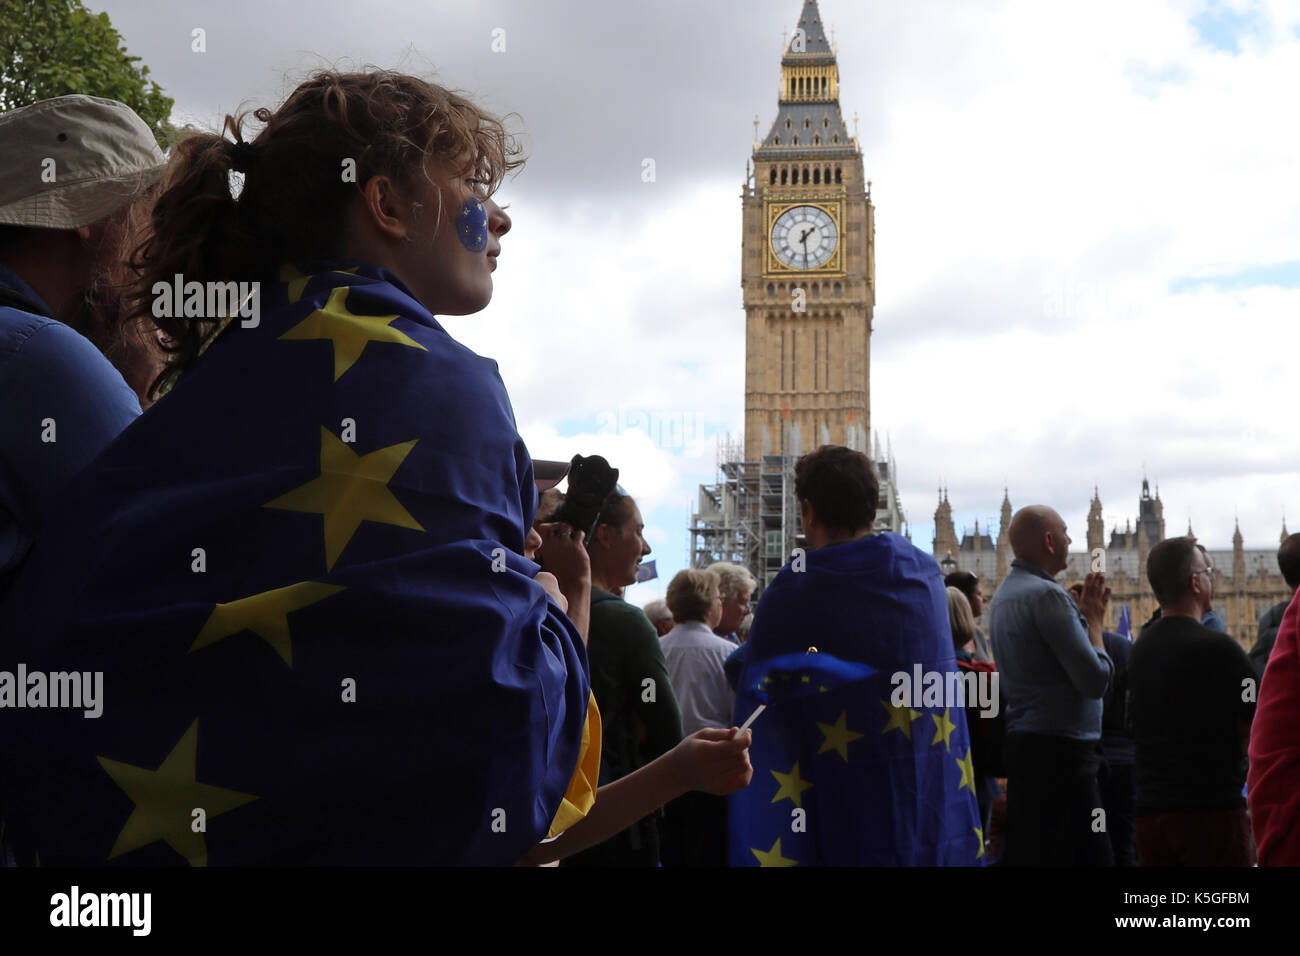 London, UK. 9th Sept, 2017. A girl wrapped in an EU flag stands in Parliament Square Garden in Westminster, central London, during the People's March for Europe, an anti-Brexit rally, on 9 September 2017. The clock tower of Big Ben is in the background. Credit: Dominic Dudley/Alamy Live News Stock Photo